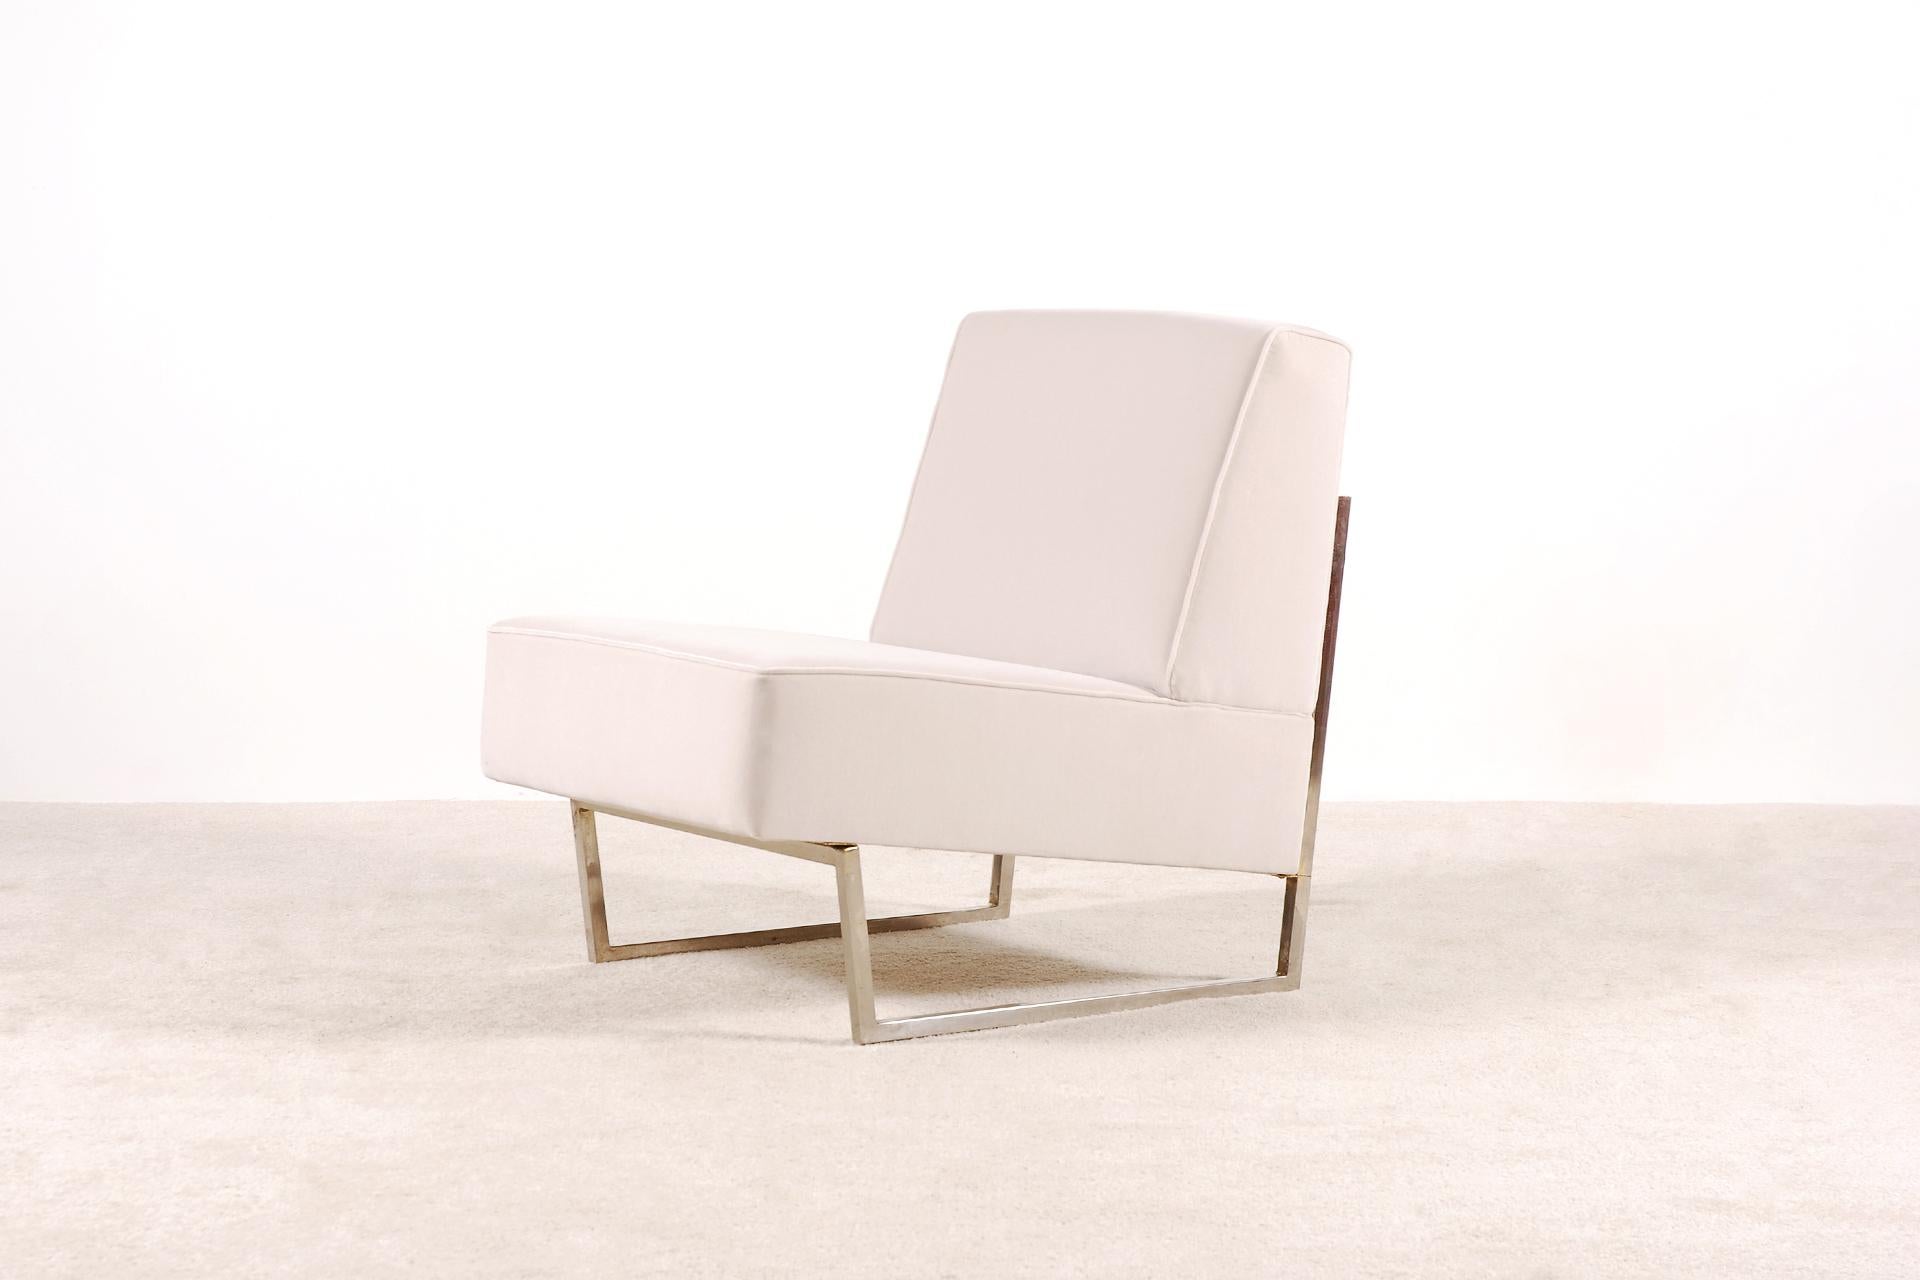 Beautiful lounge chair designed by French designer Pierre Guariche.
Model 